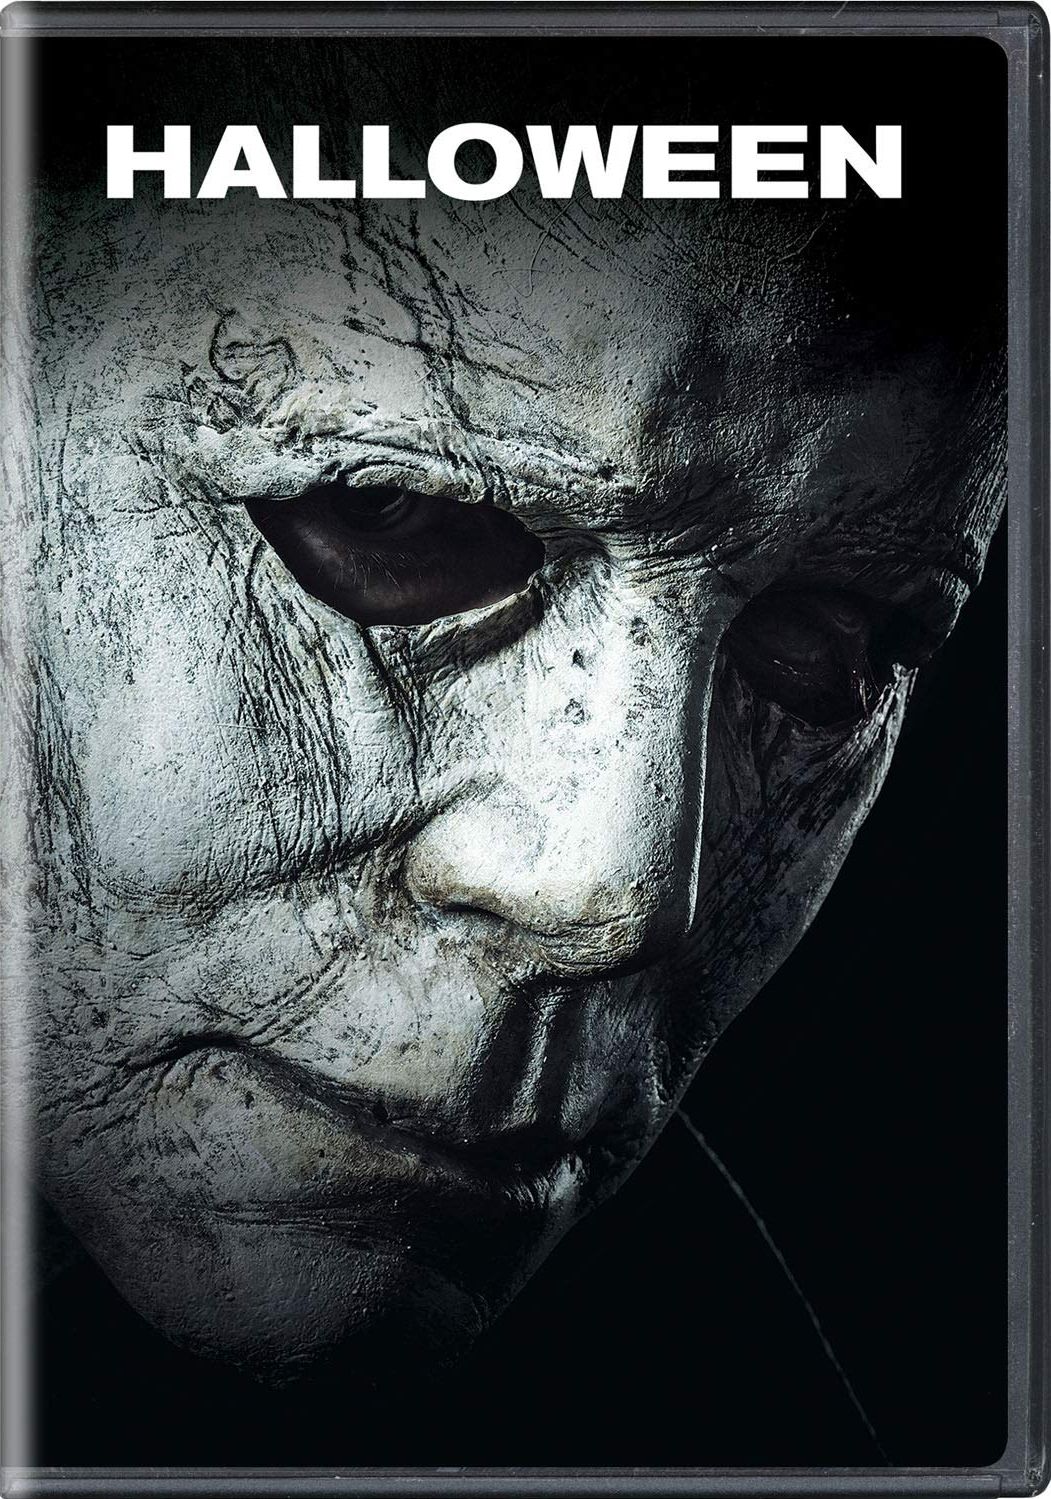 when does the halloween sequel 2020 come out on dvd Halloween Dvd Release Date January 15 2019 when does the halloween sequel 2020 come out on dvd